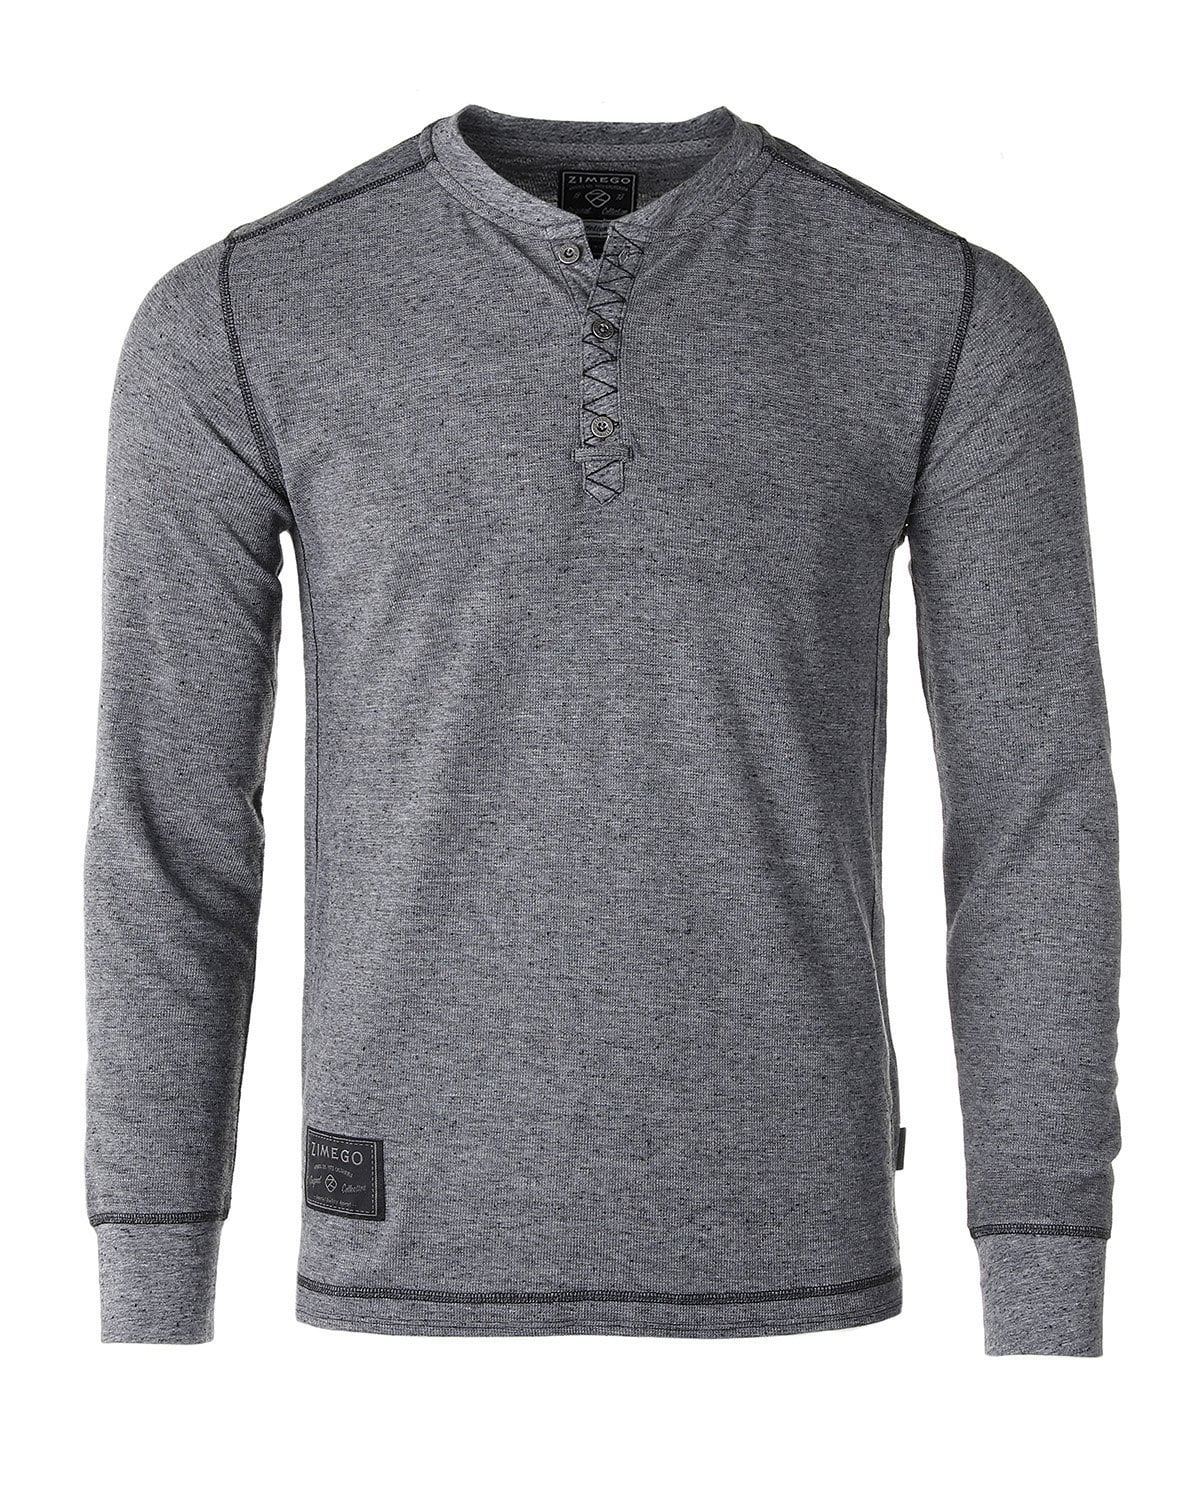 henley shirt athletic fit